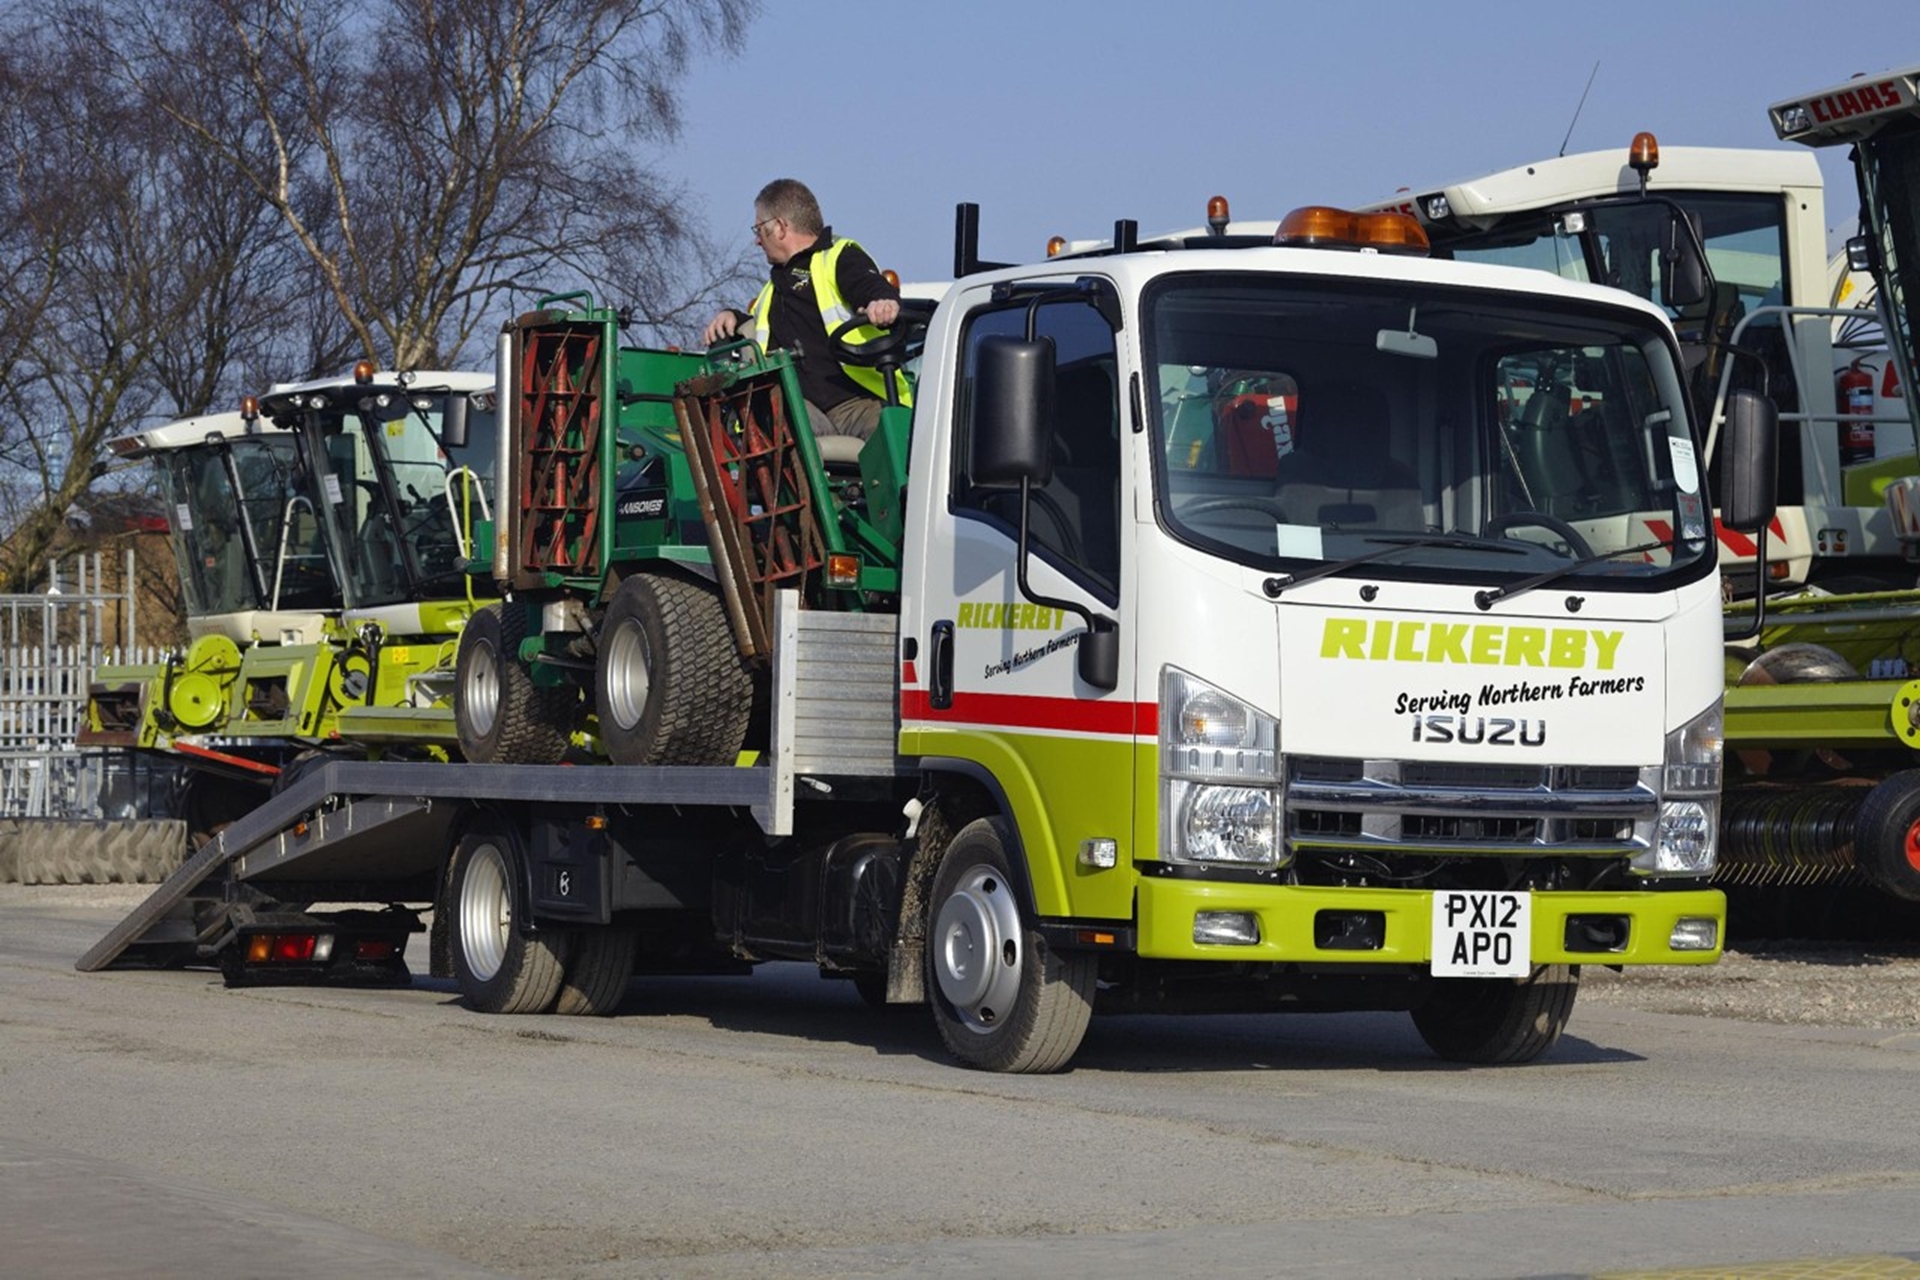 ISUZU DEAL GIVES RICKERBY GREATER PAYLOAD AND FLEXIBILITY